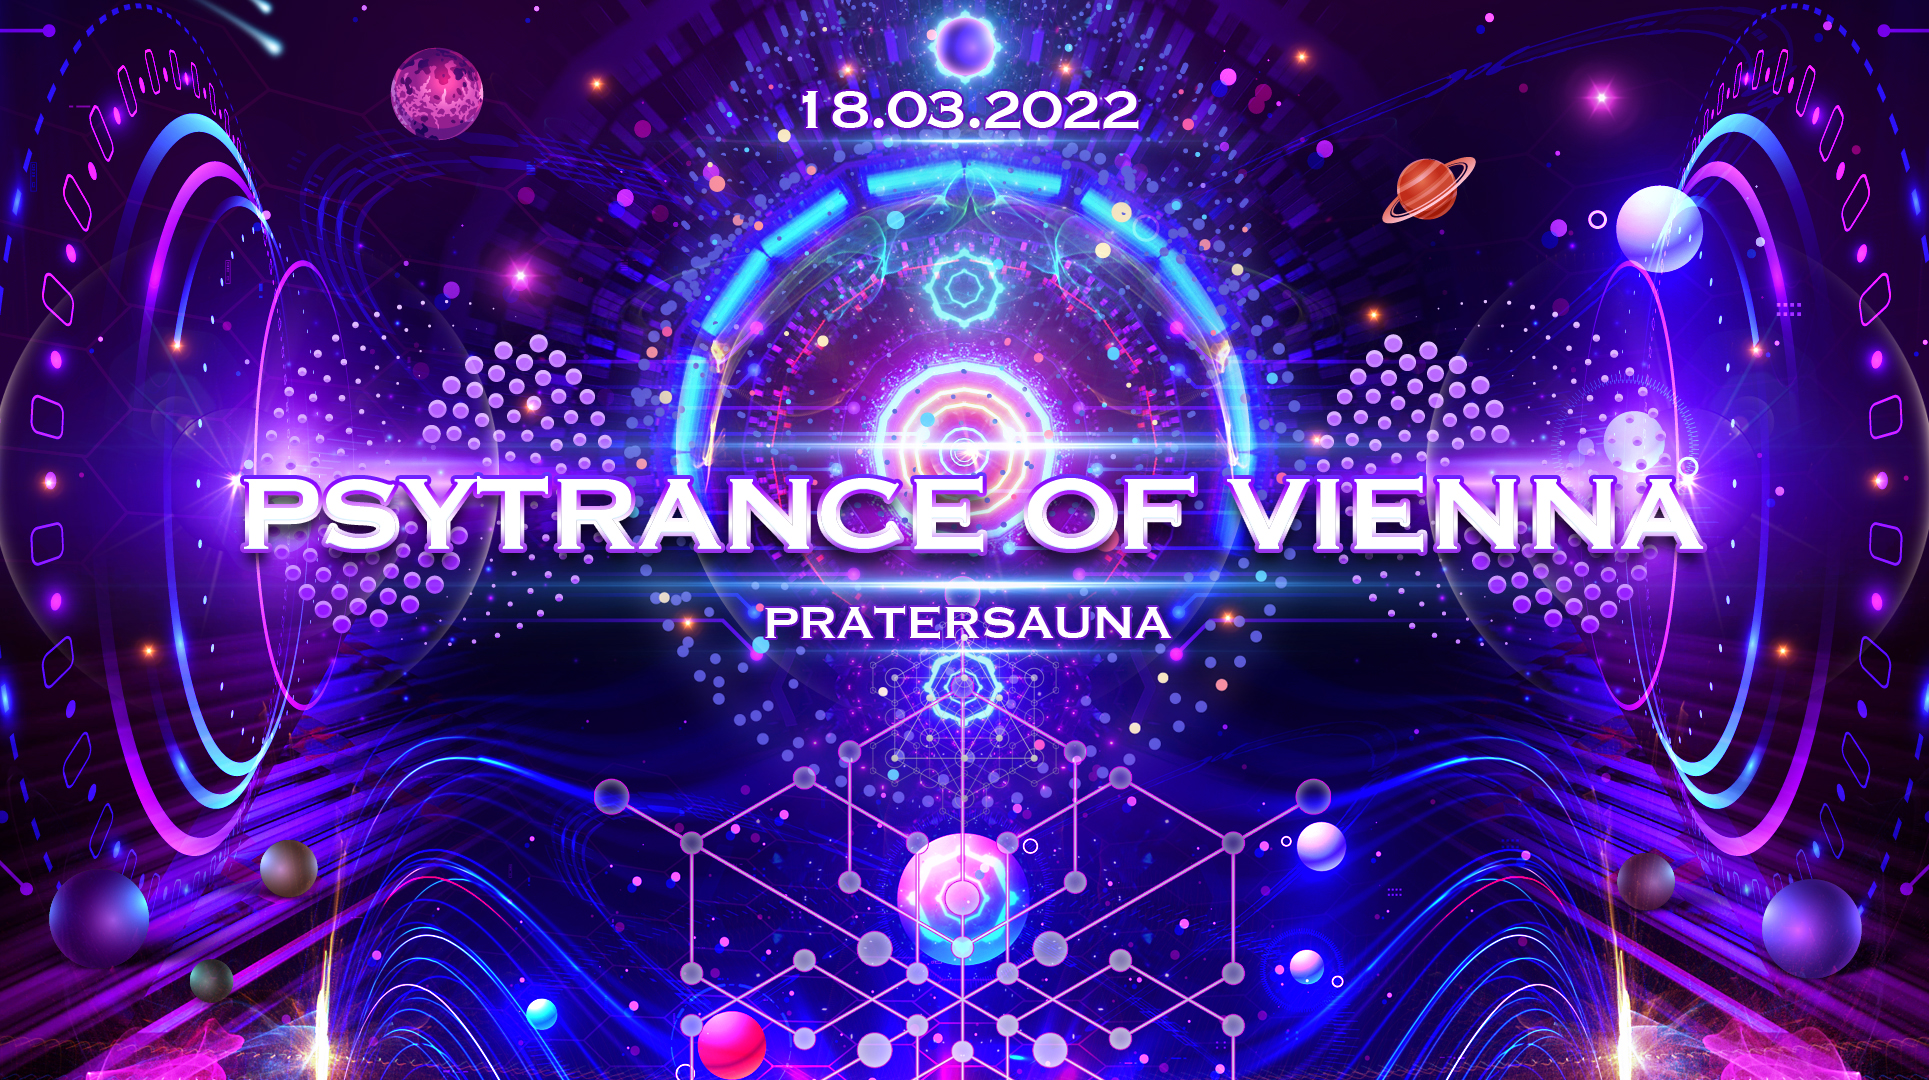 We are Back! Psytrance of Vienna am 18. March 2022 @ Pratersauna.